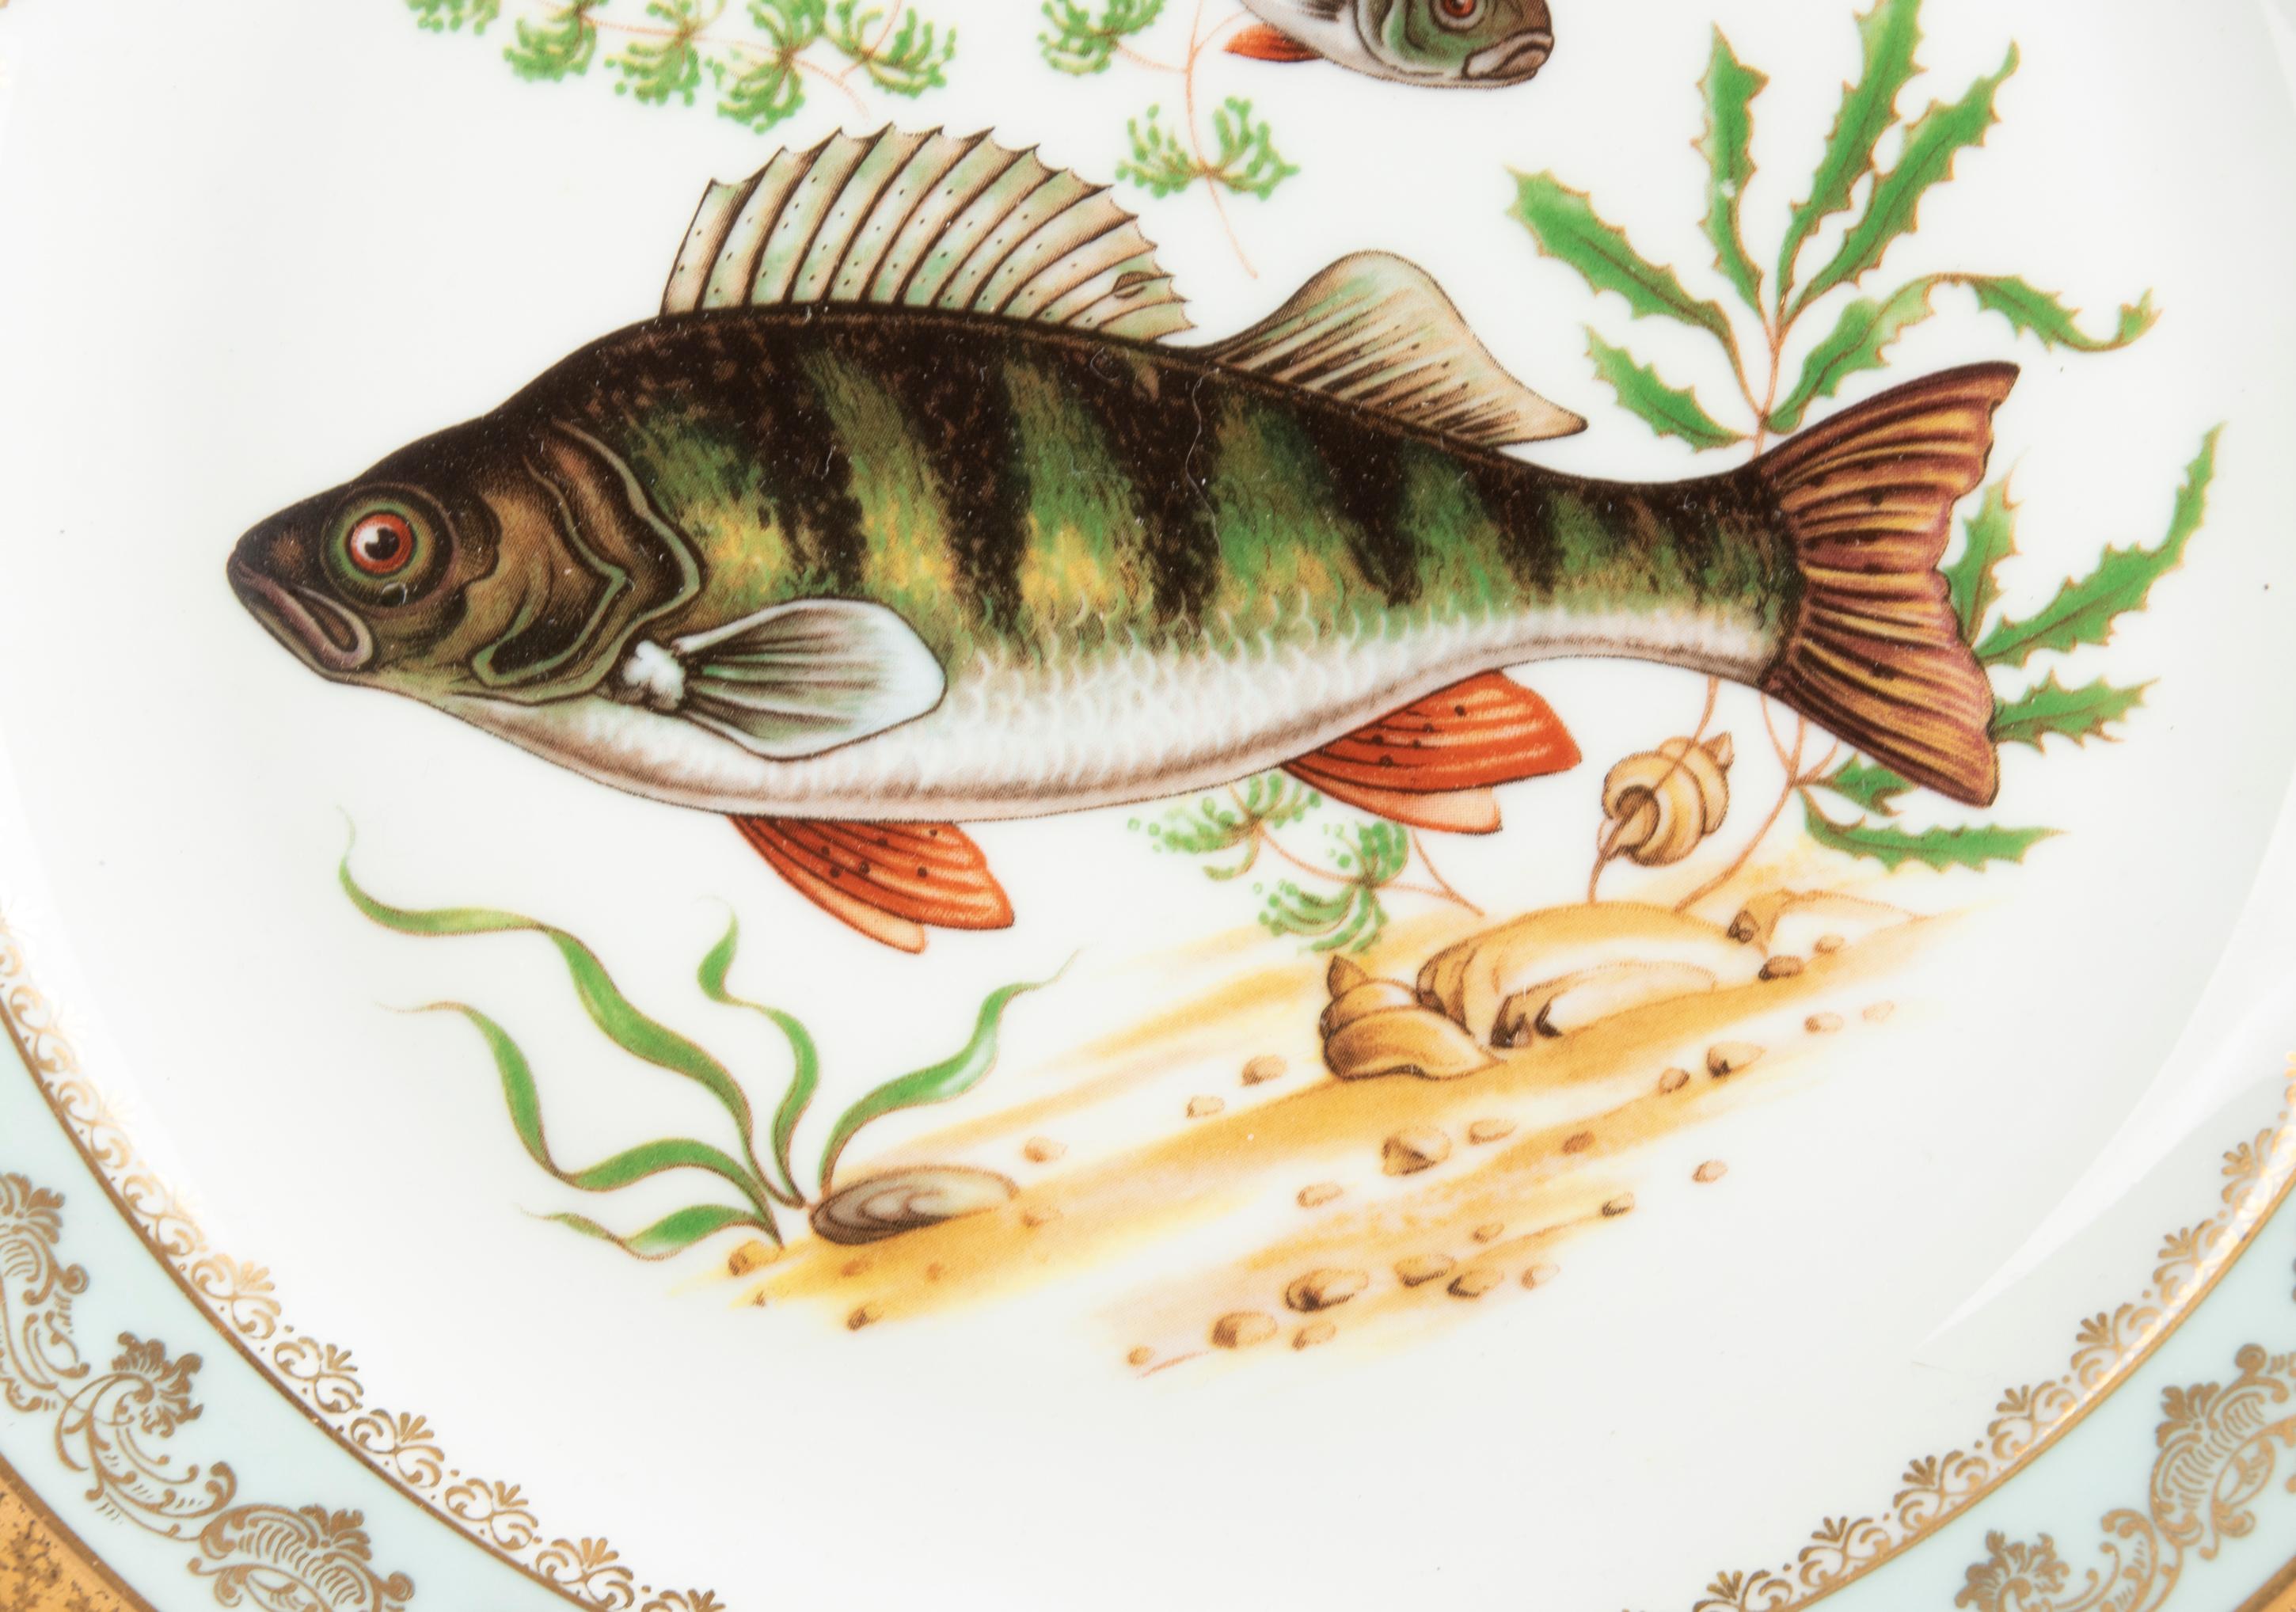 Inlay Porcelain Fish Service by Limoges Chadelaud with Gilt Encrusted Rims